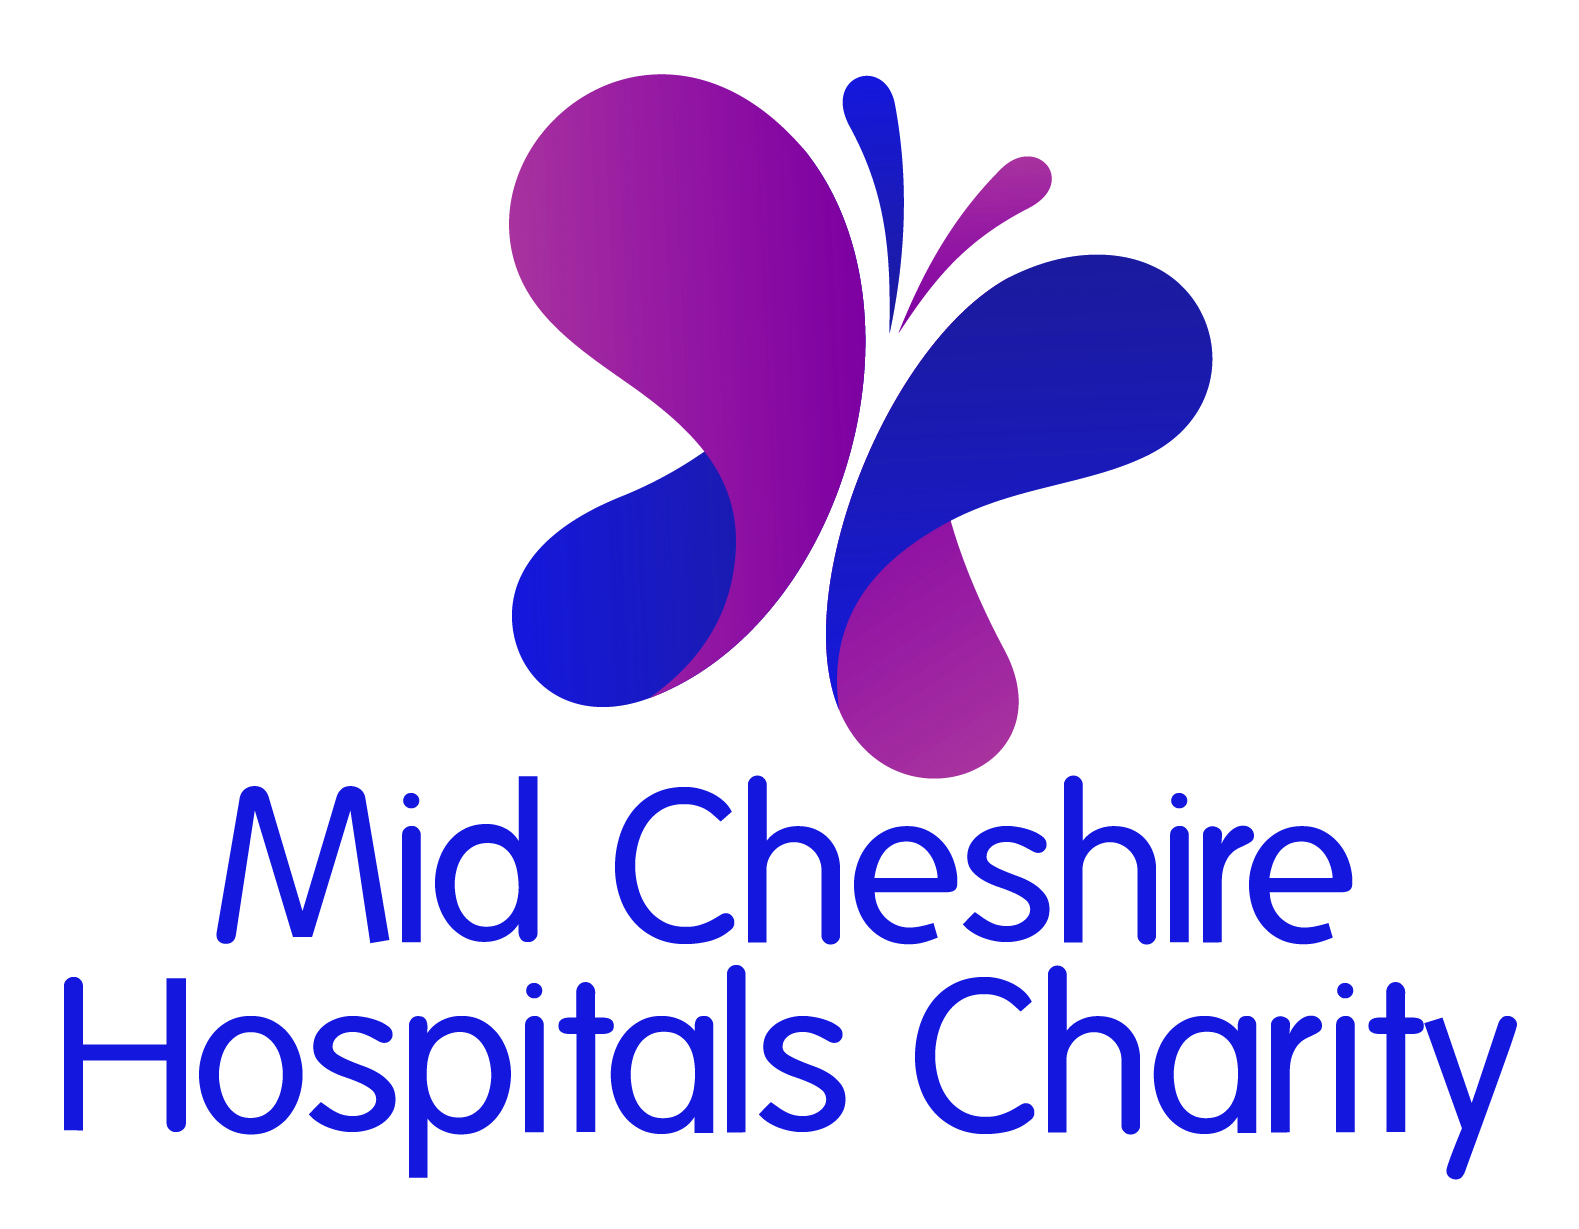 MCH Charity